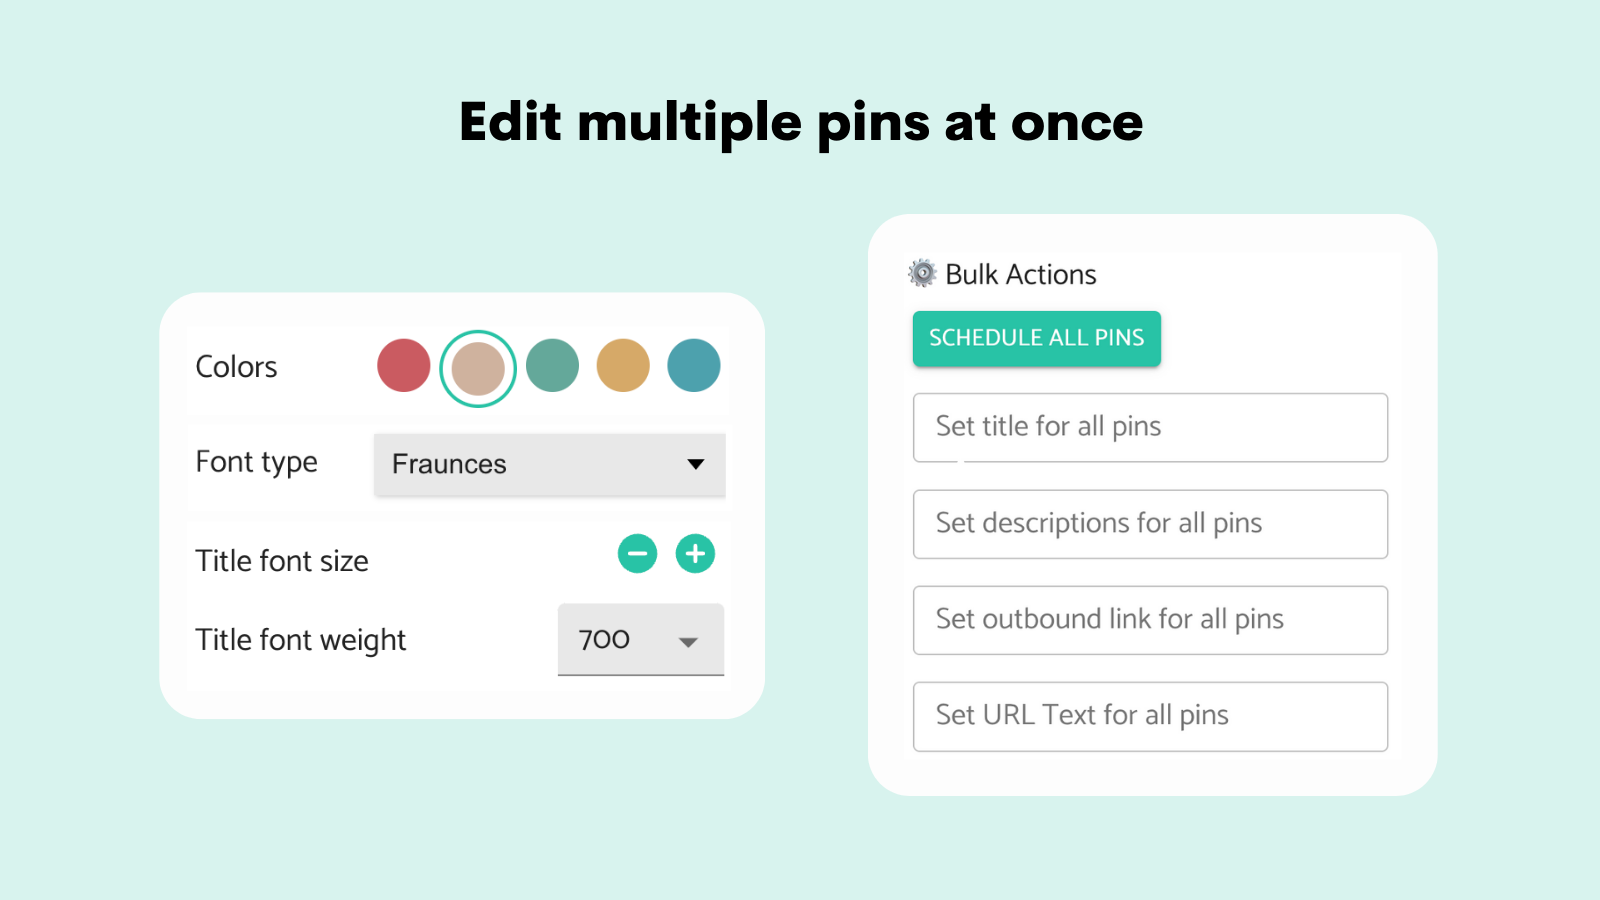 Edit multiple pins at once